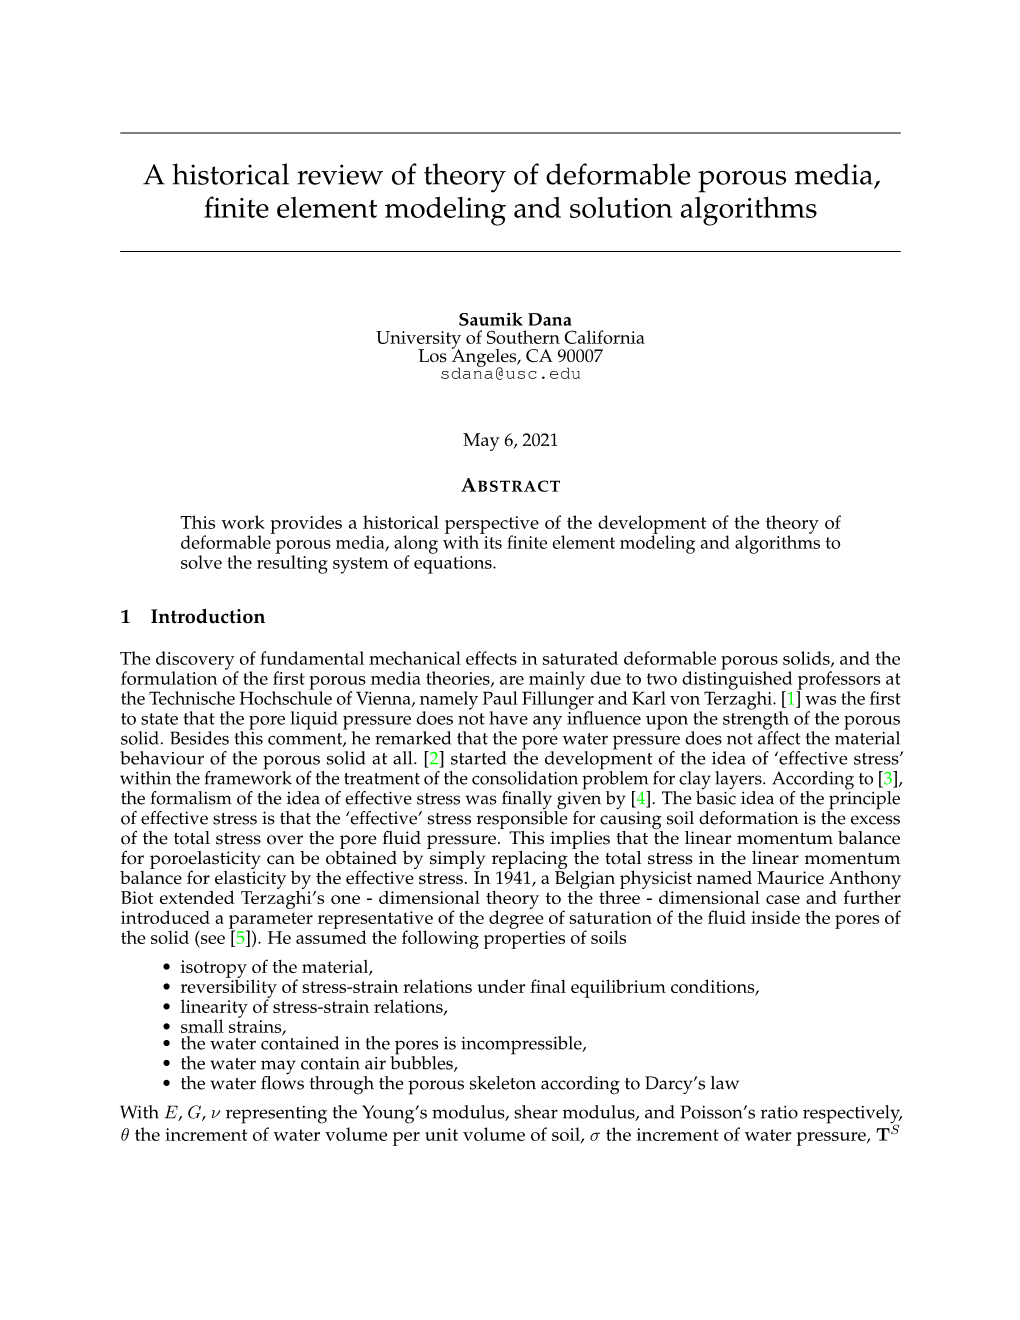 A Historical Review of Theory of Deformable Porous Media, Finite